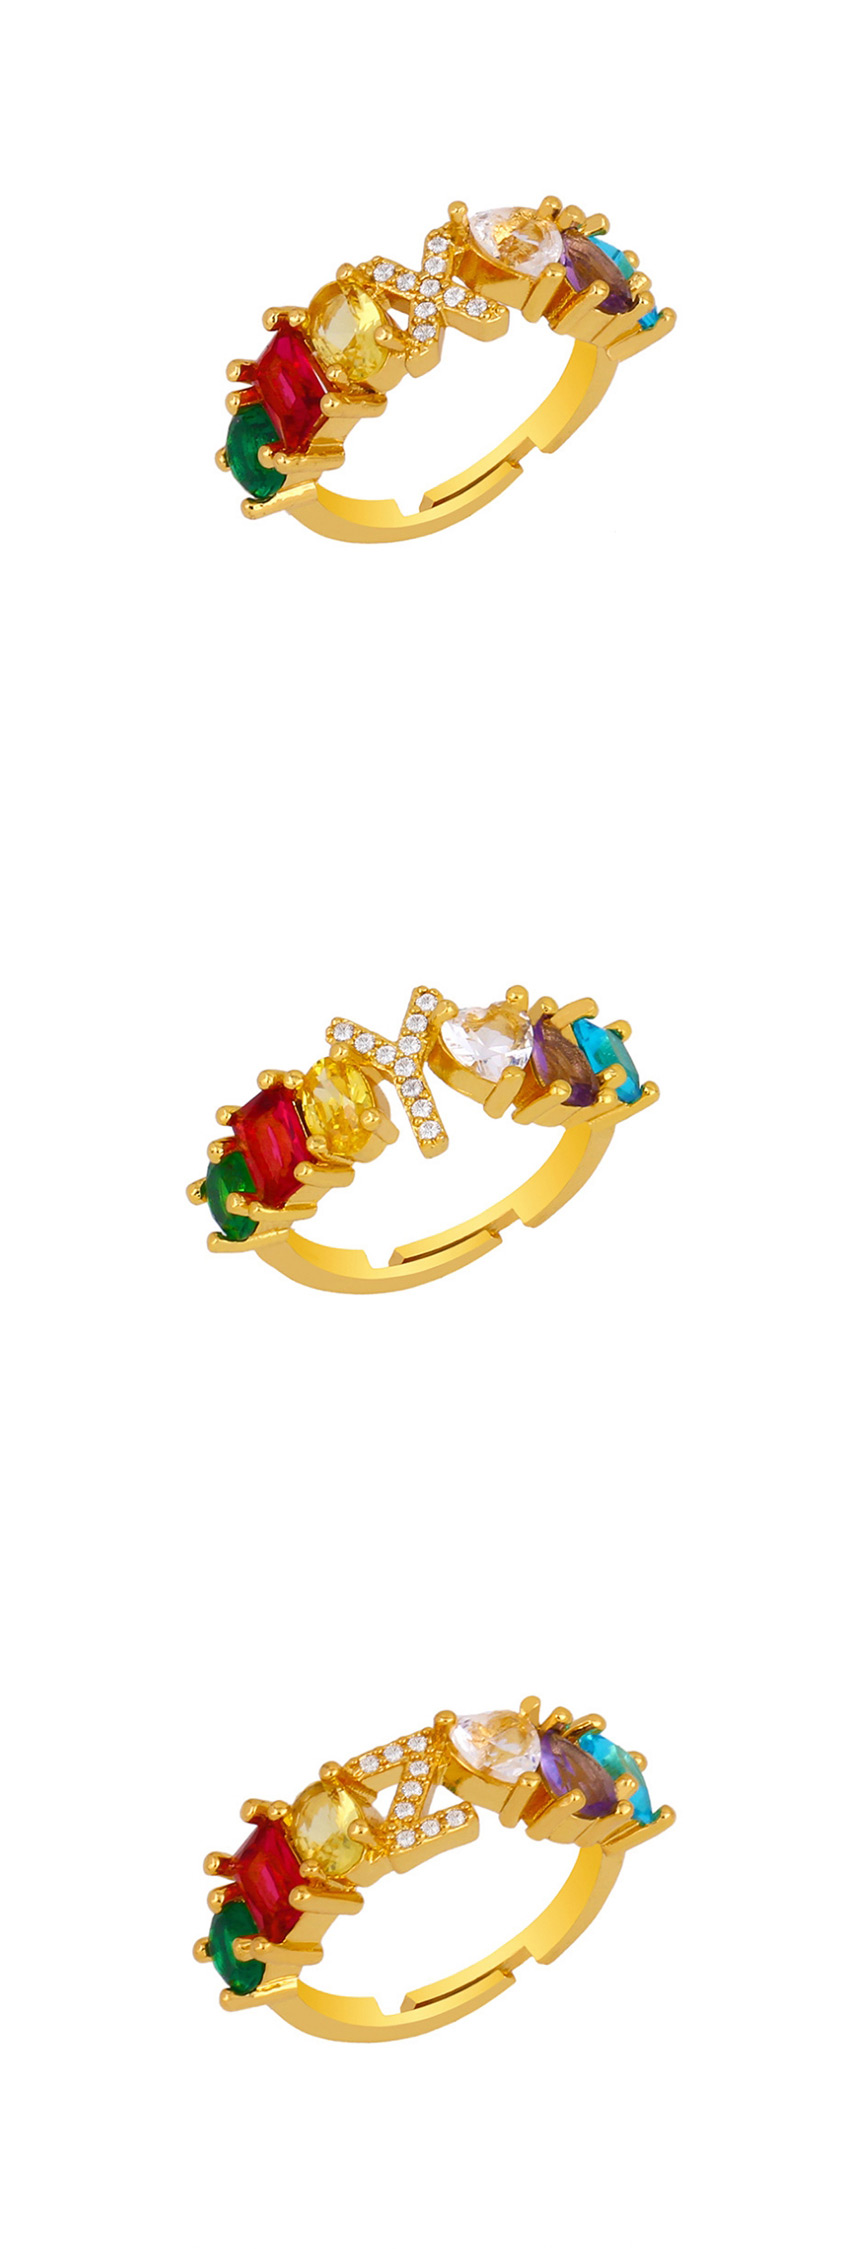 Fashion E Gold Heart-shaped Adjustable Ring With Colorful Diamond Letters,Rings